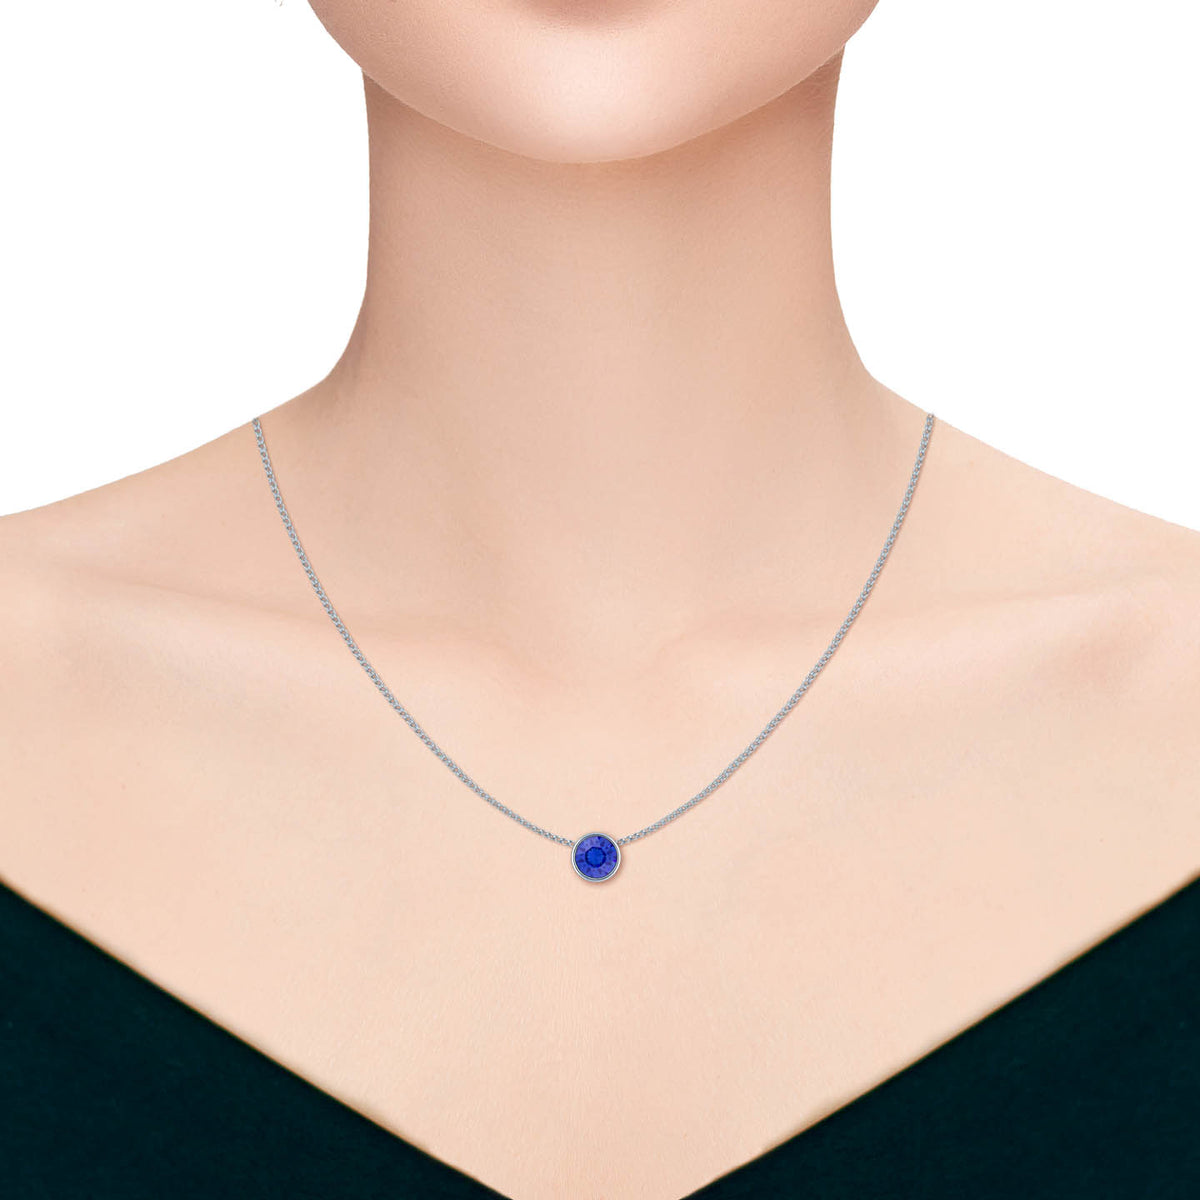 Harley Small Pendant Necklace with Blue Sapphire Round Crystals from Swarovski Silver Toned Rhodium Plated - Ed Heart